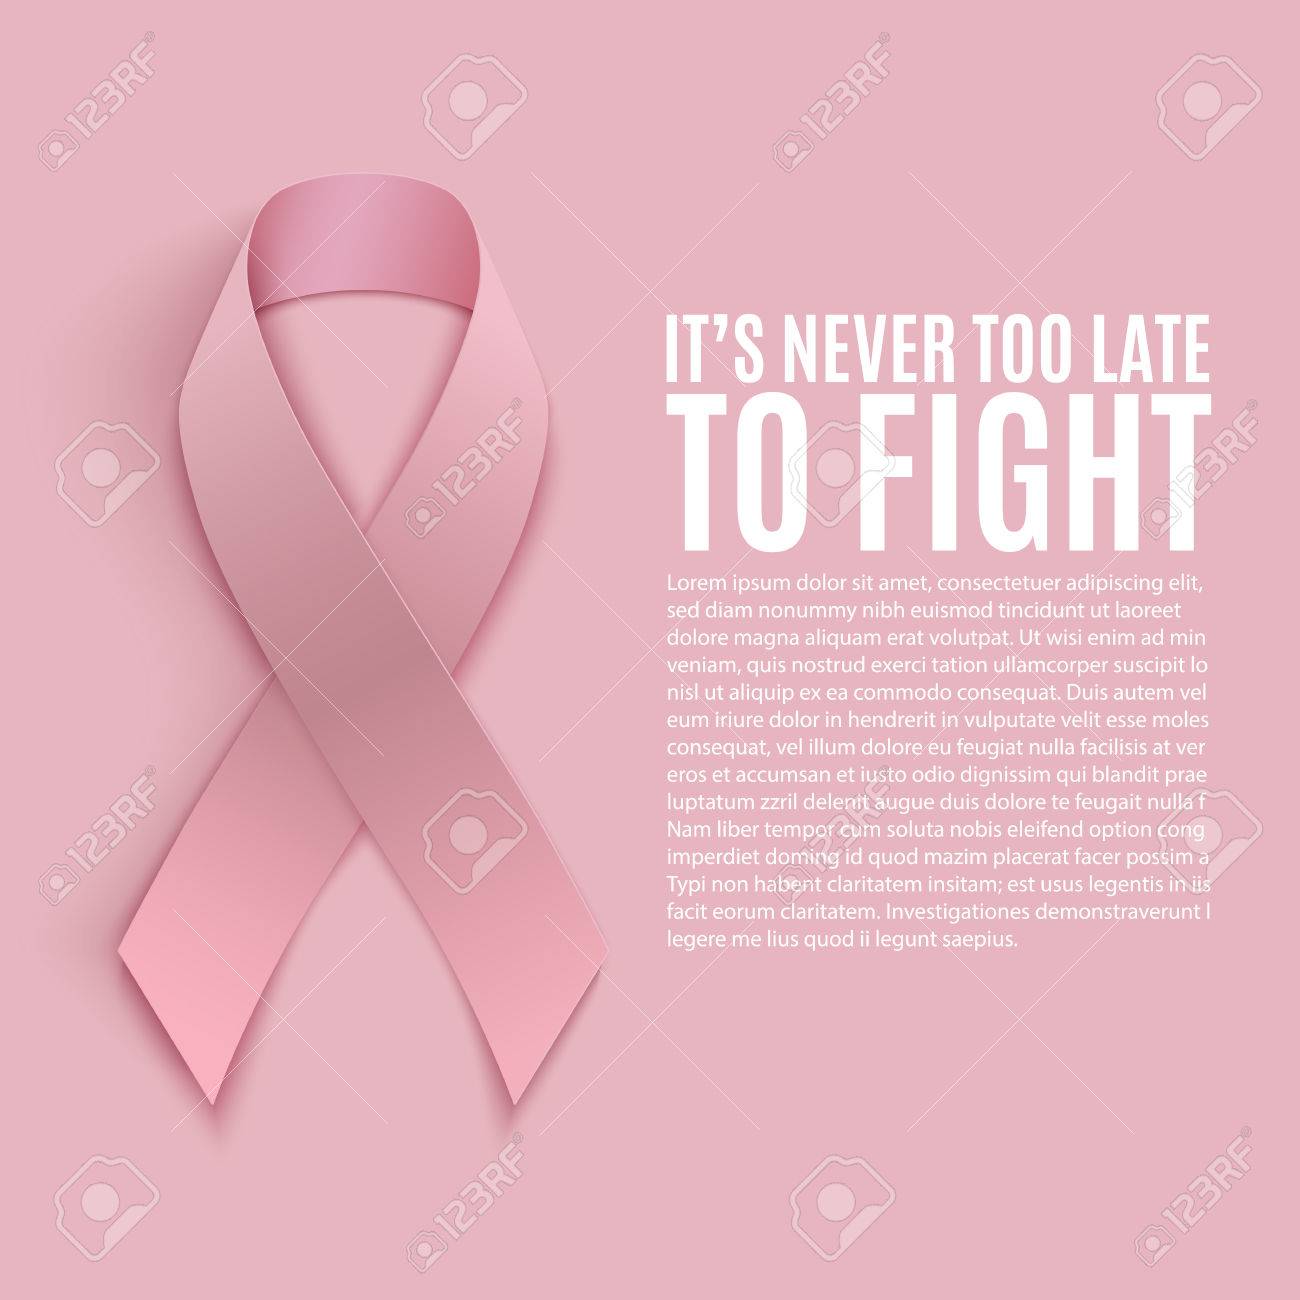 Breast Cancer Awareness Month Background With Pink Ribbon Vector